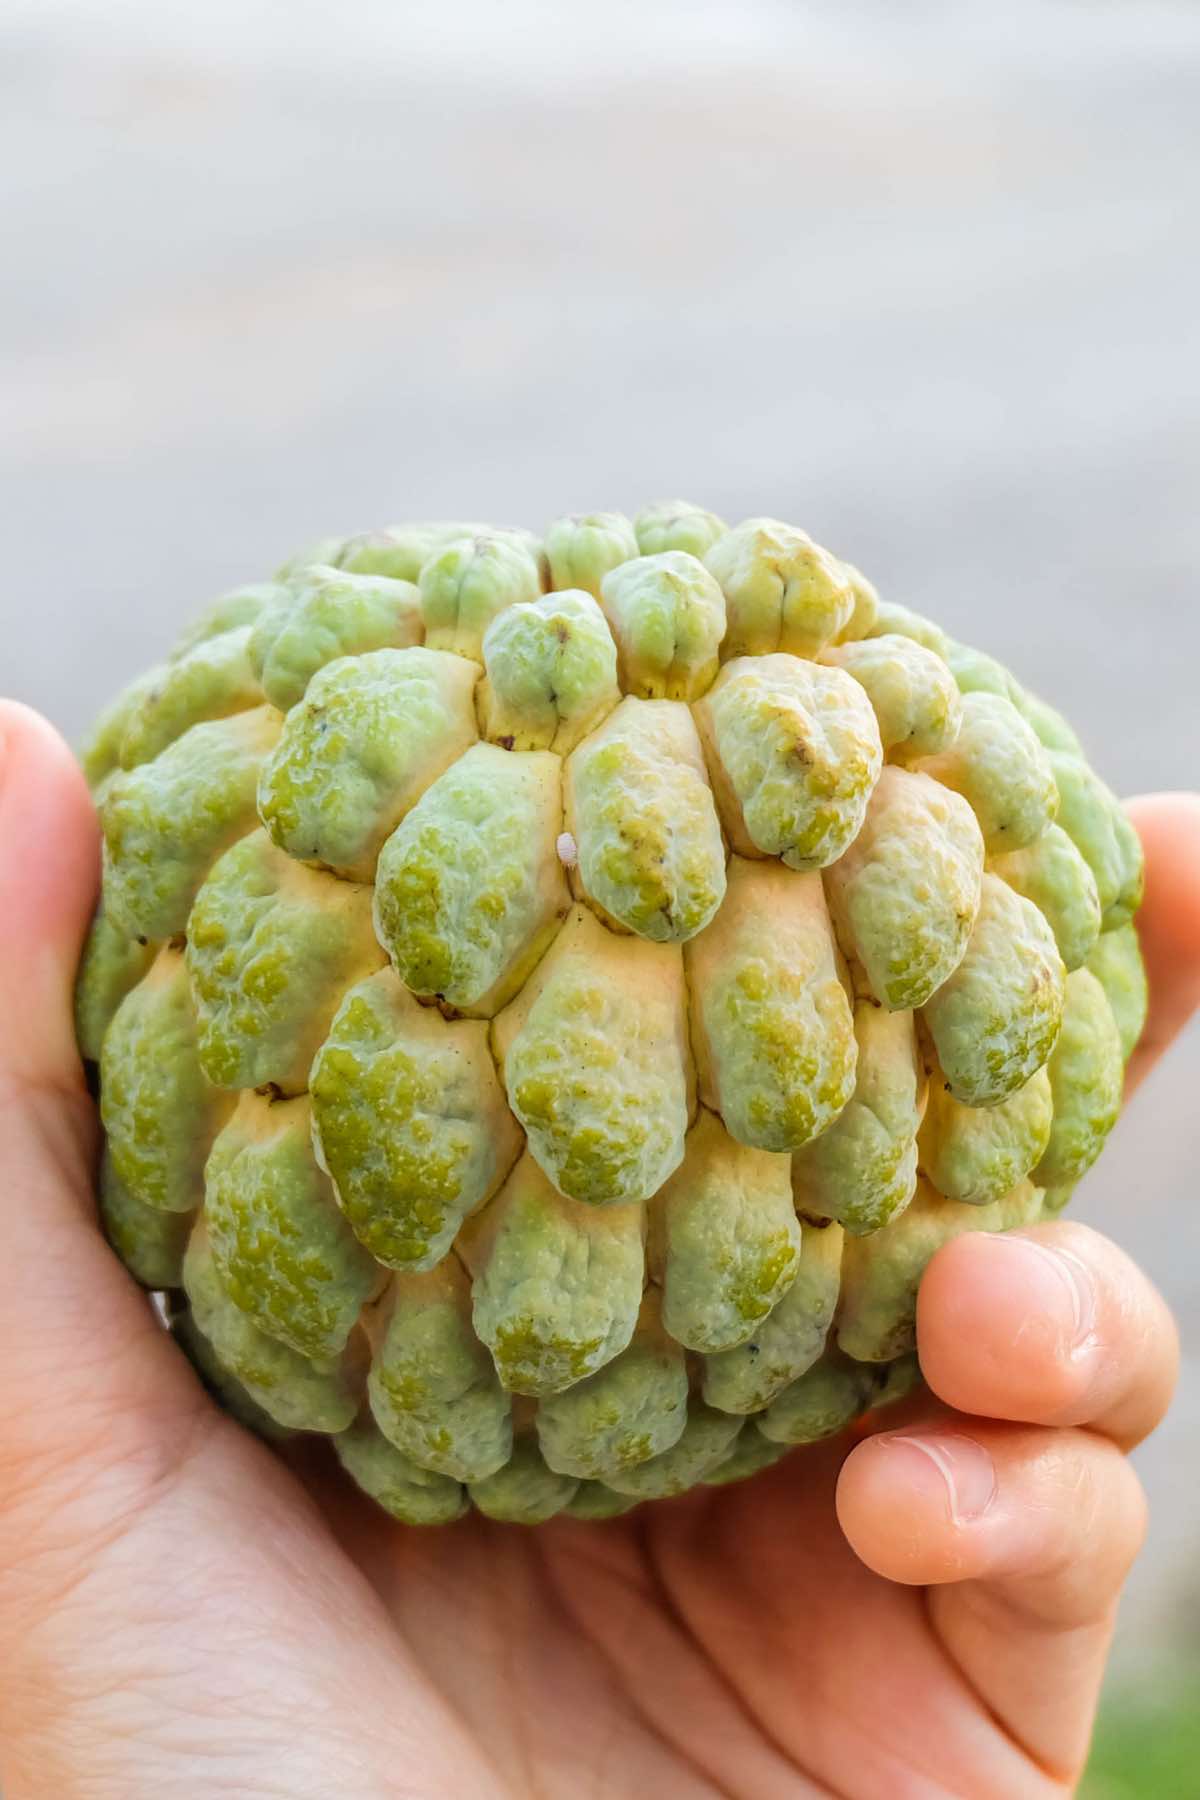 Closeup view of a custard apple with knobby green skin